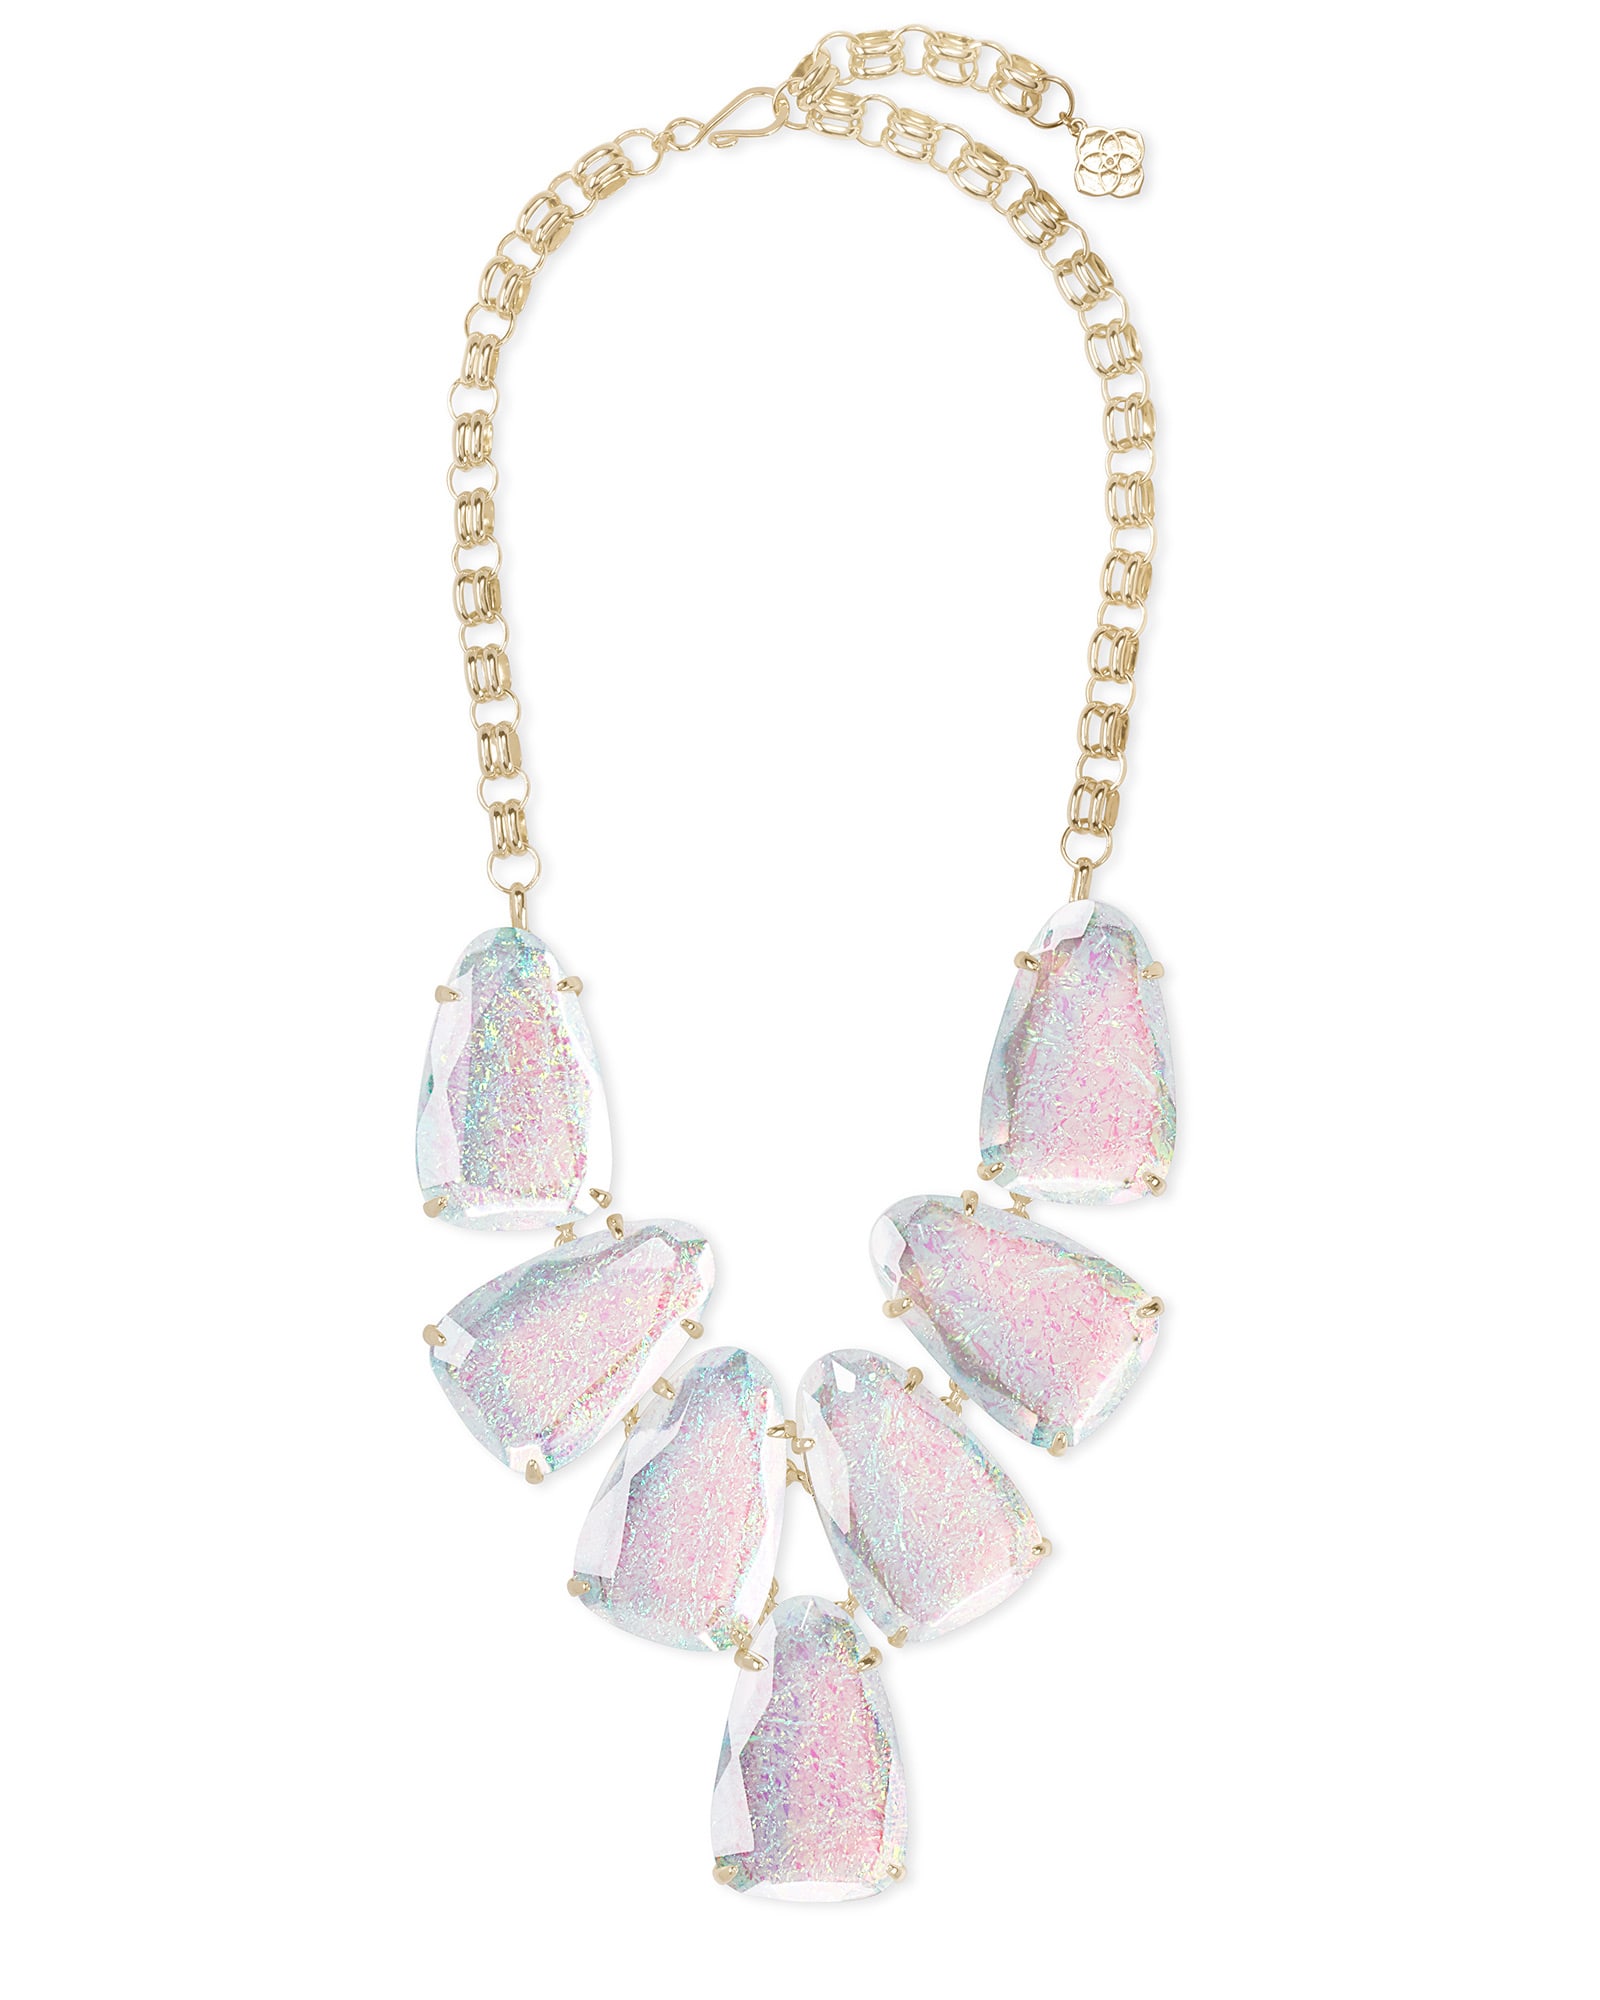 Harlow Gold Statement Necklace in Iridescent Dichroic Foil